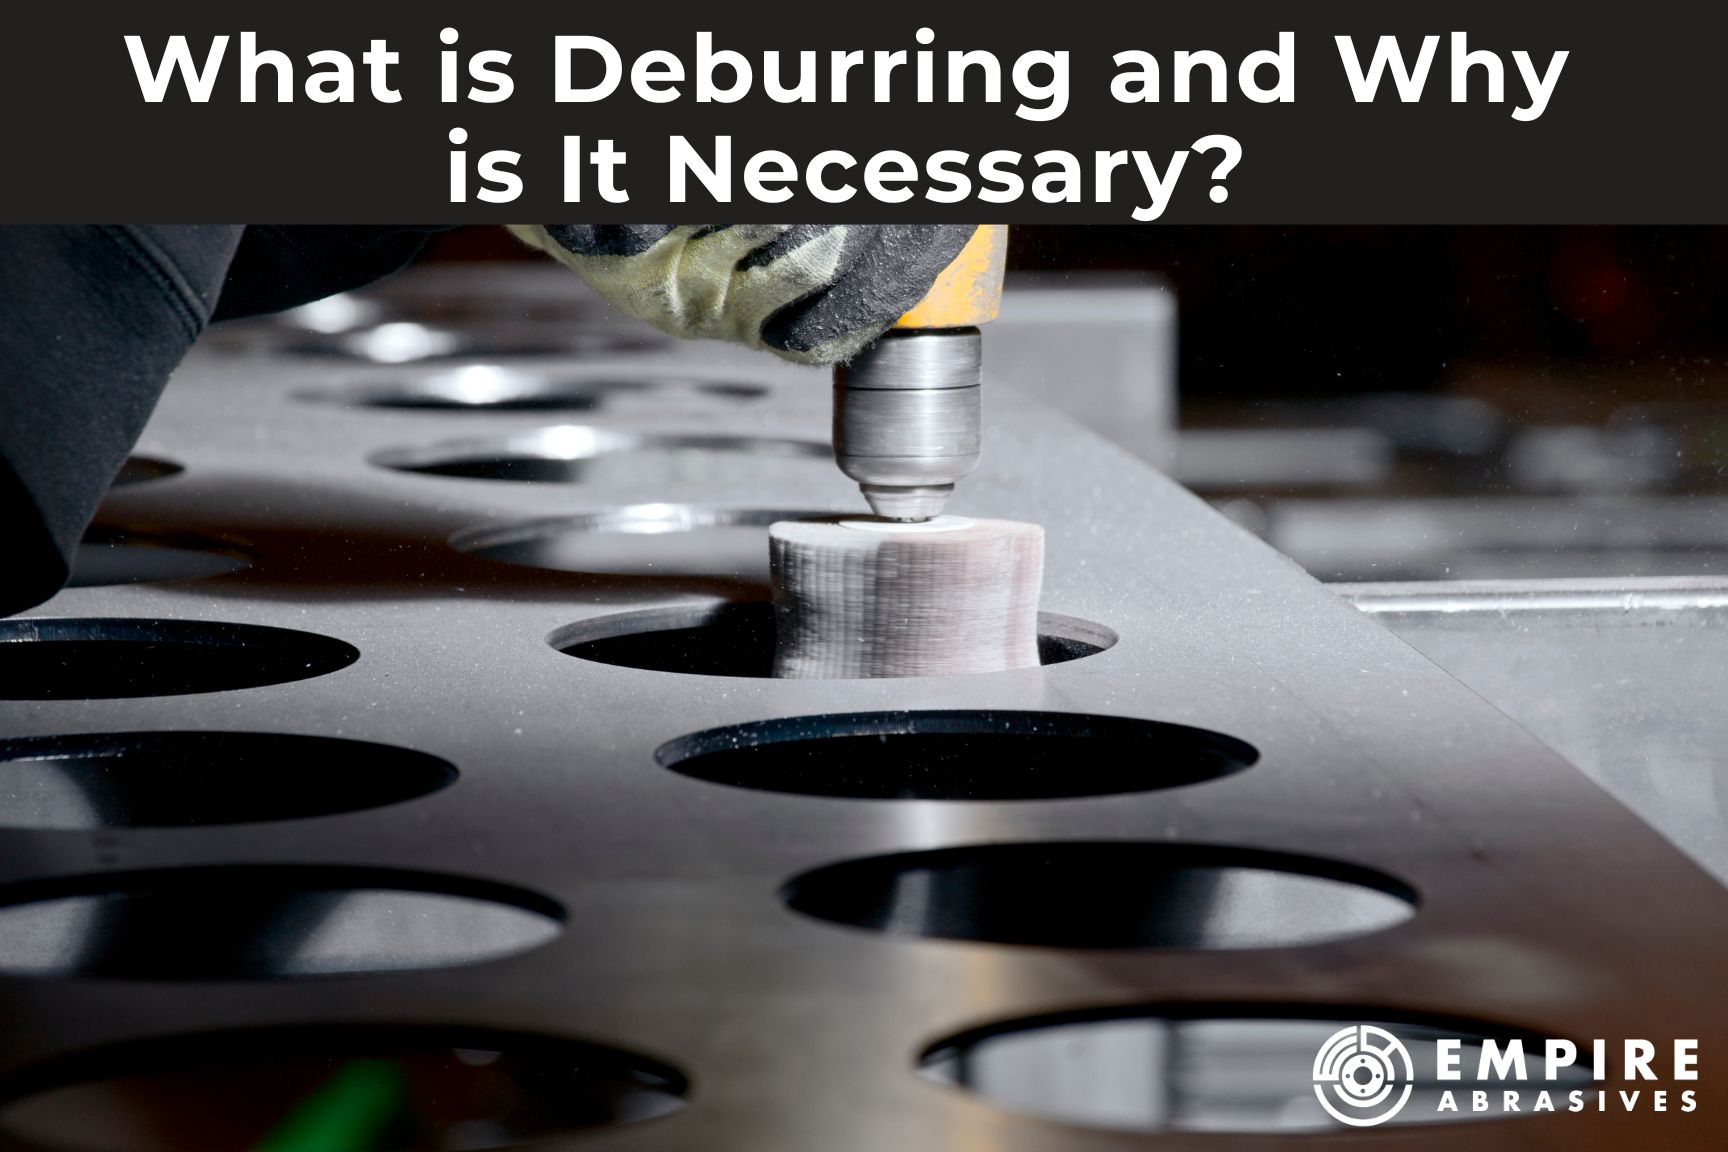 What is Deburring and Why is it Necessary? - Blog post header from Empire Abrasives